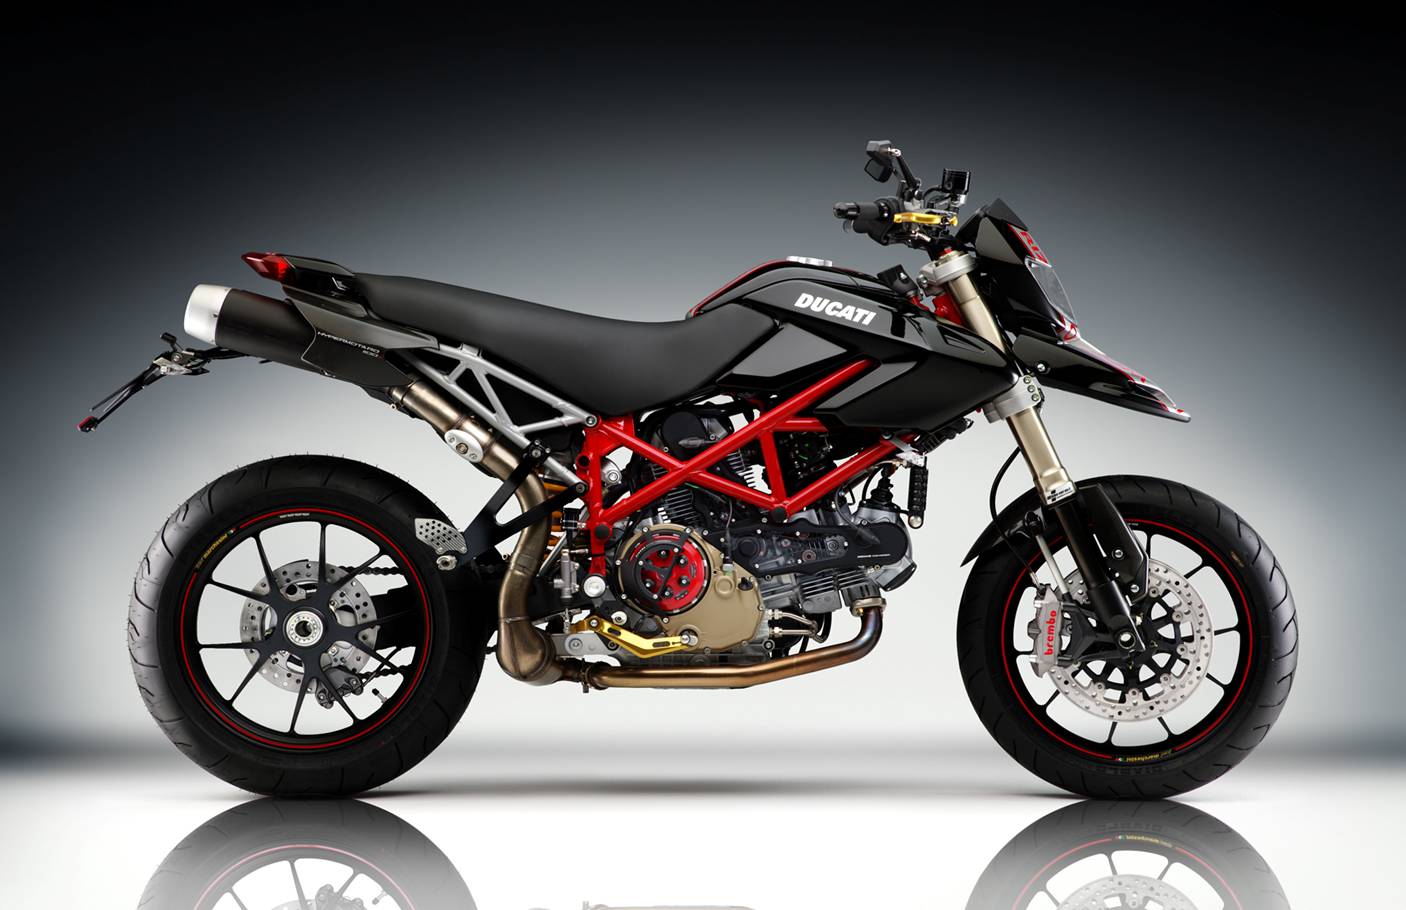 motorcycles: The Ducati Hypermotard attacks urban canyons and carves